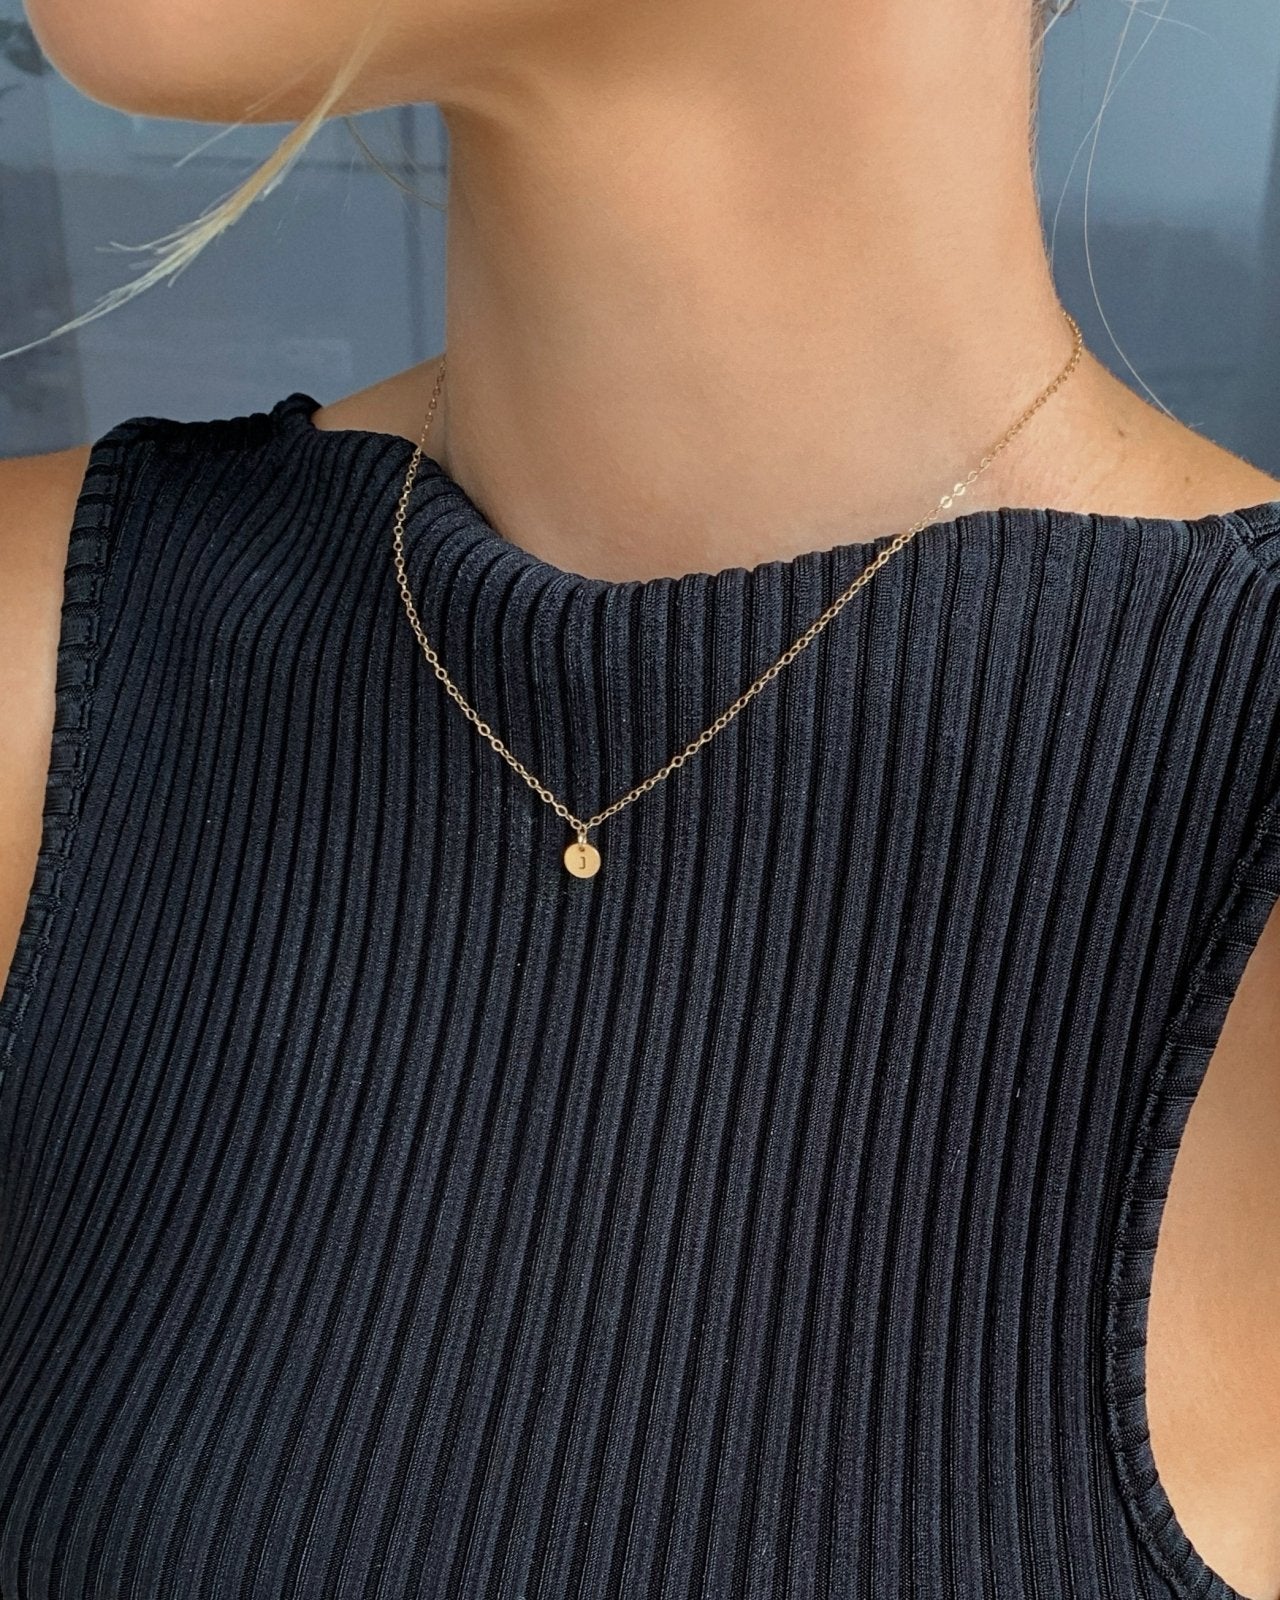 LETTER COIN NECKLACE- 14k Yellow Gold - The Littl - Deluxe Chain - 37cm (choker)